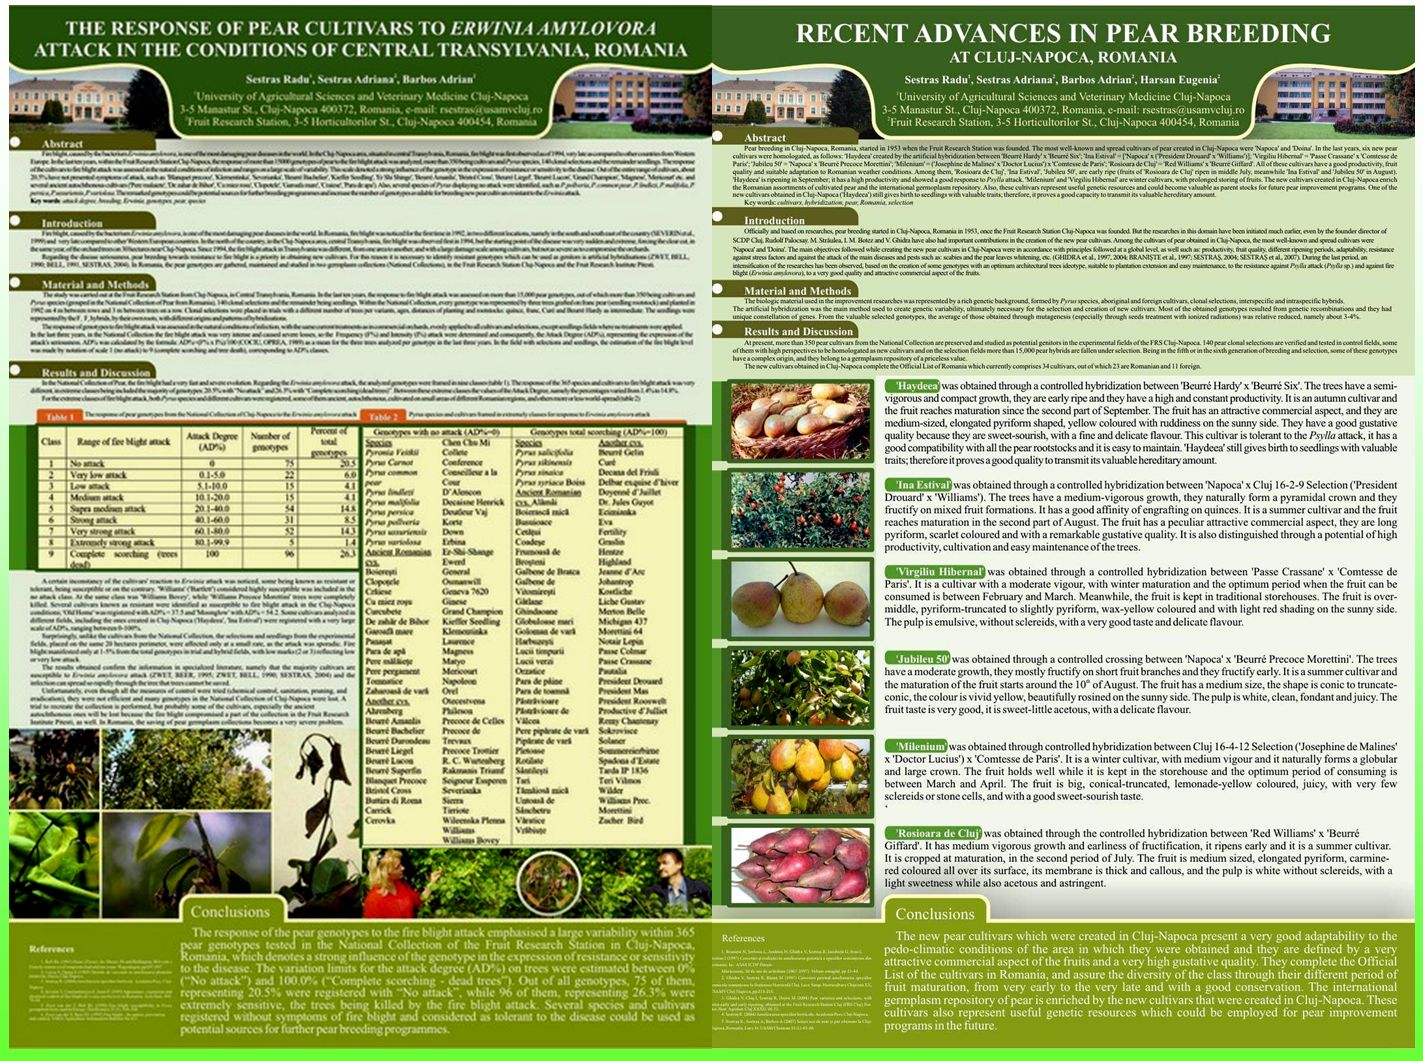 Apple and pear breeding in Cluj-Napoca. Posters Adriana and Radu Sestras